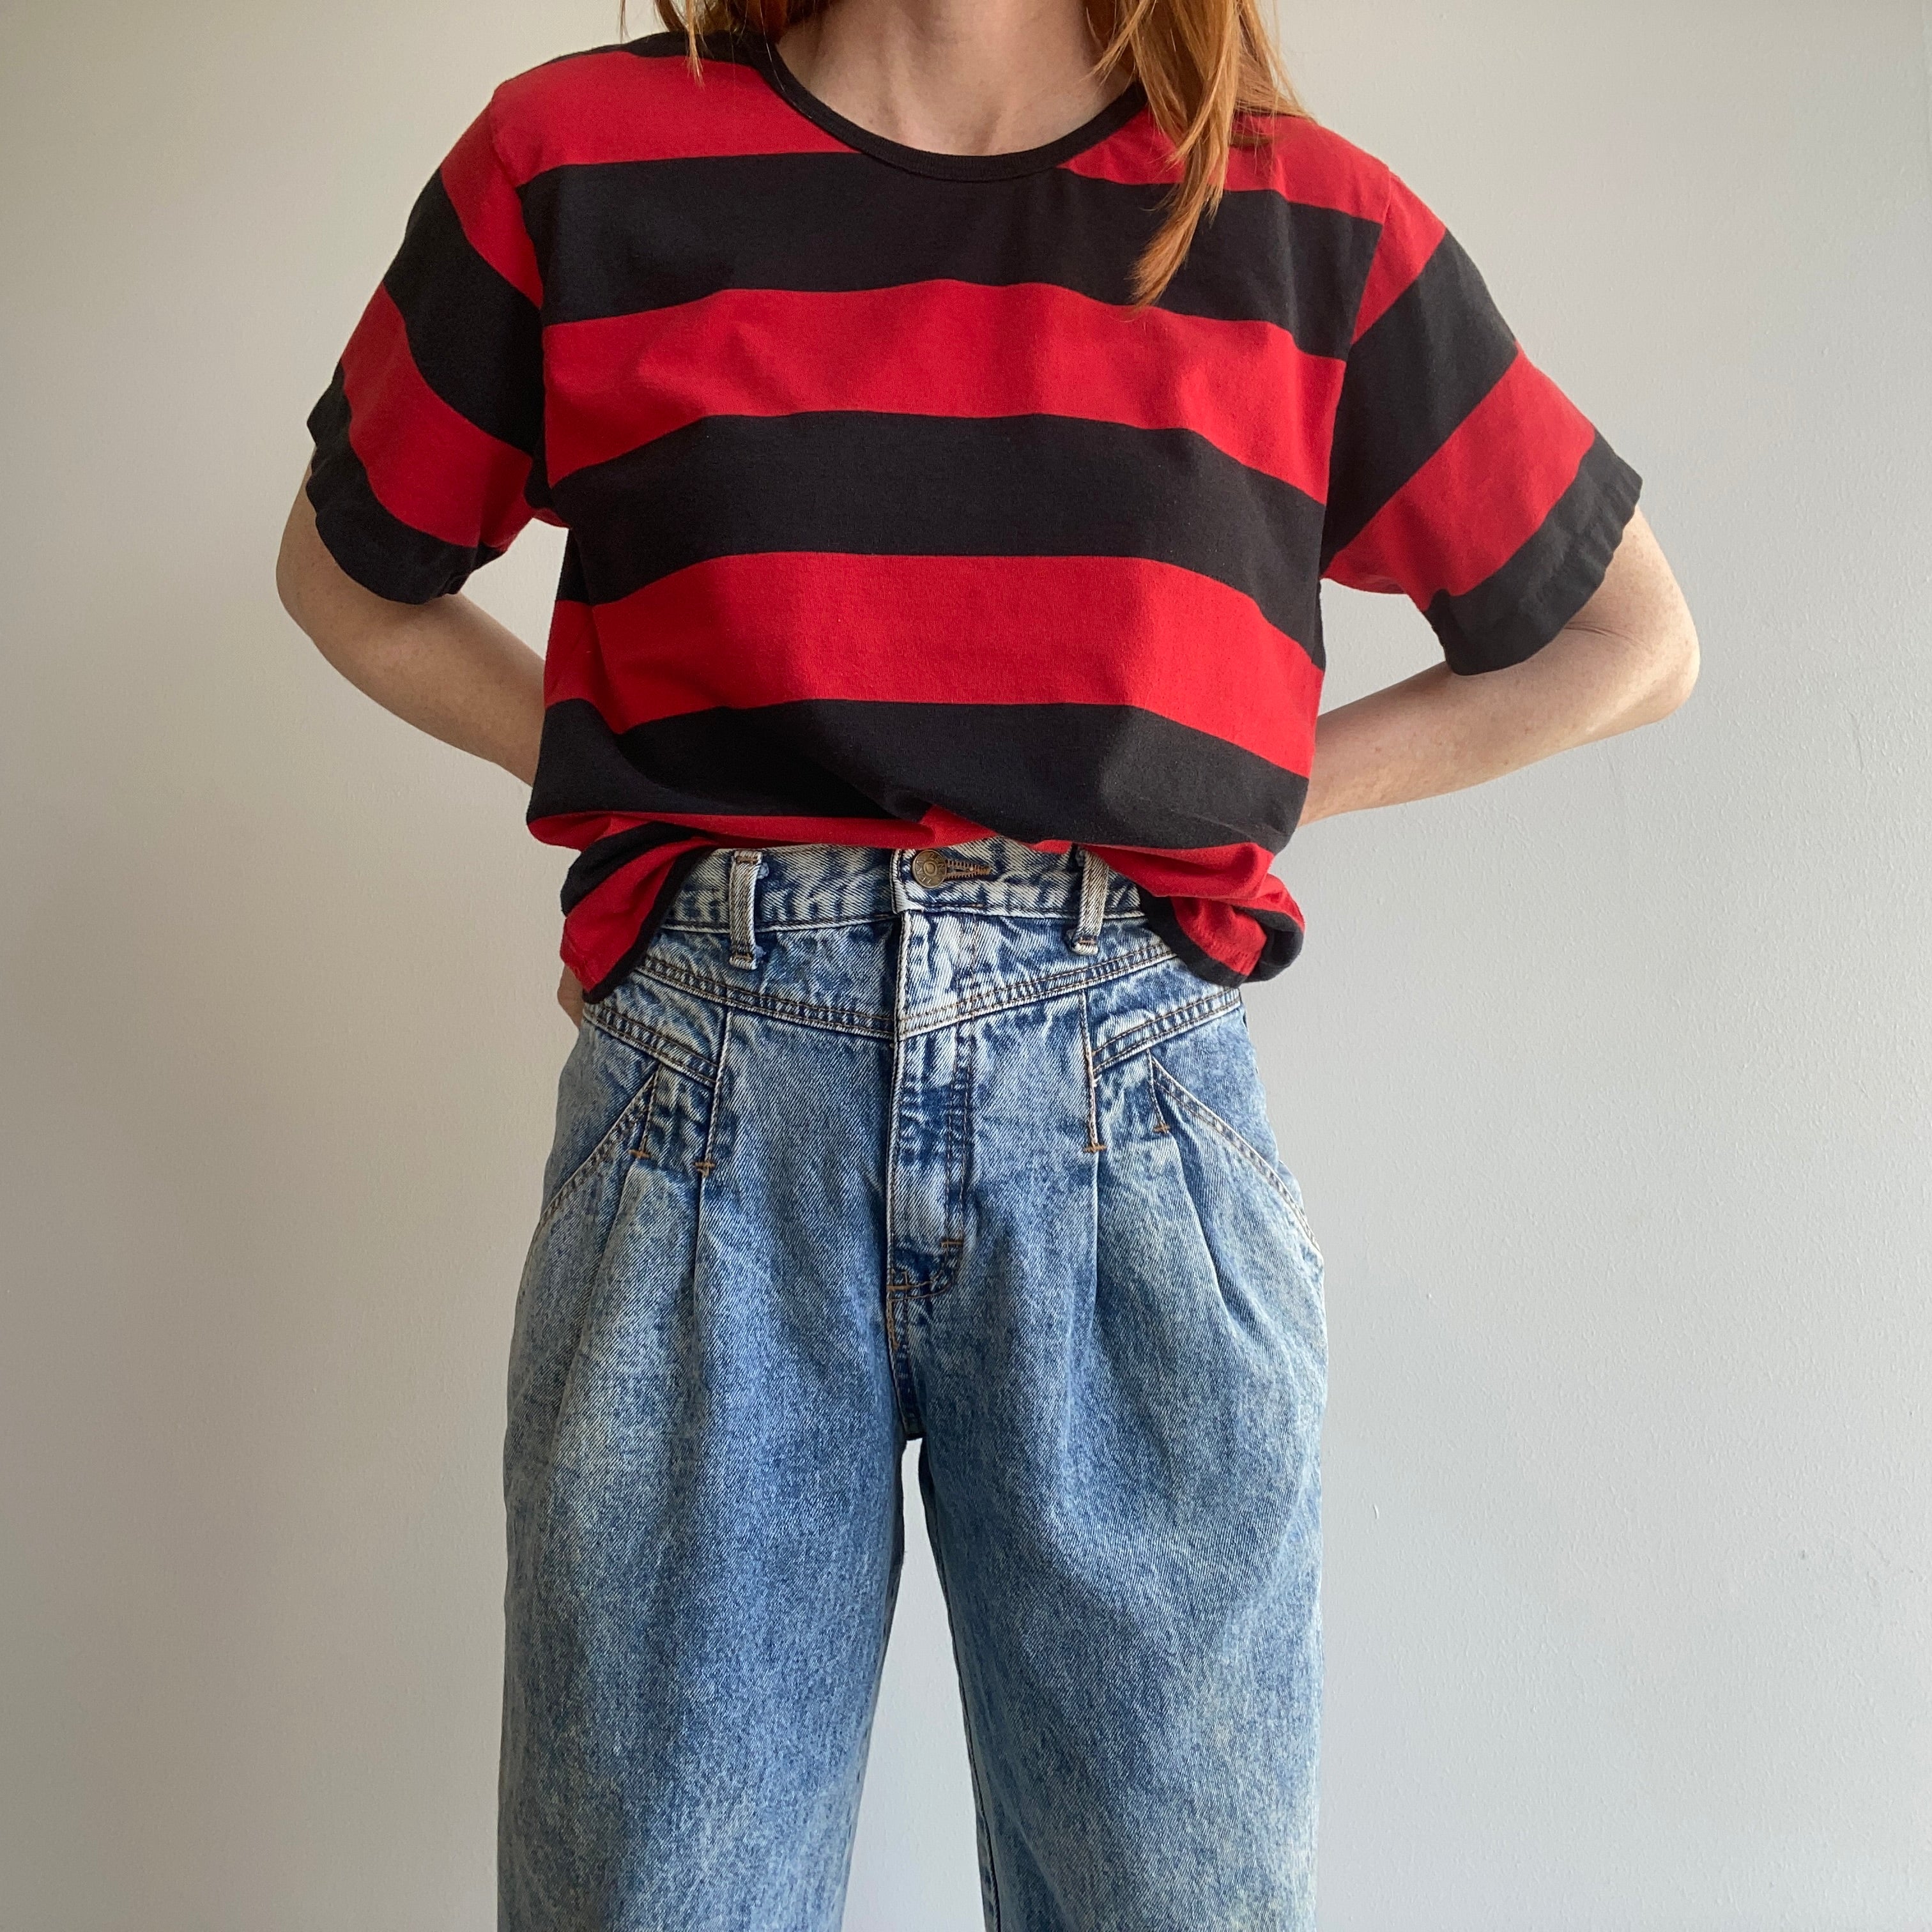 1990s Rolled Neck Black and Red Striped T-Shirt